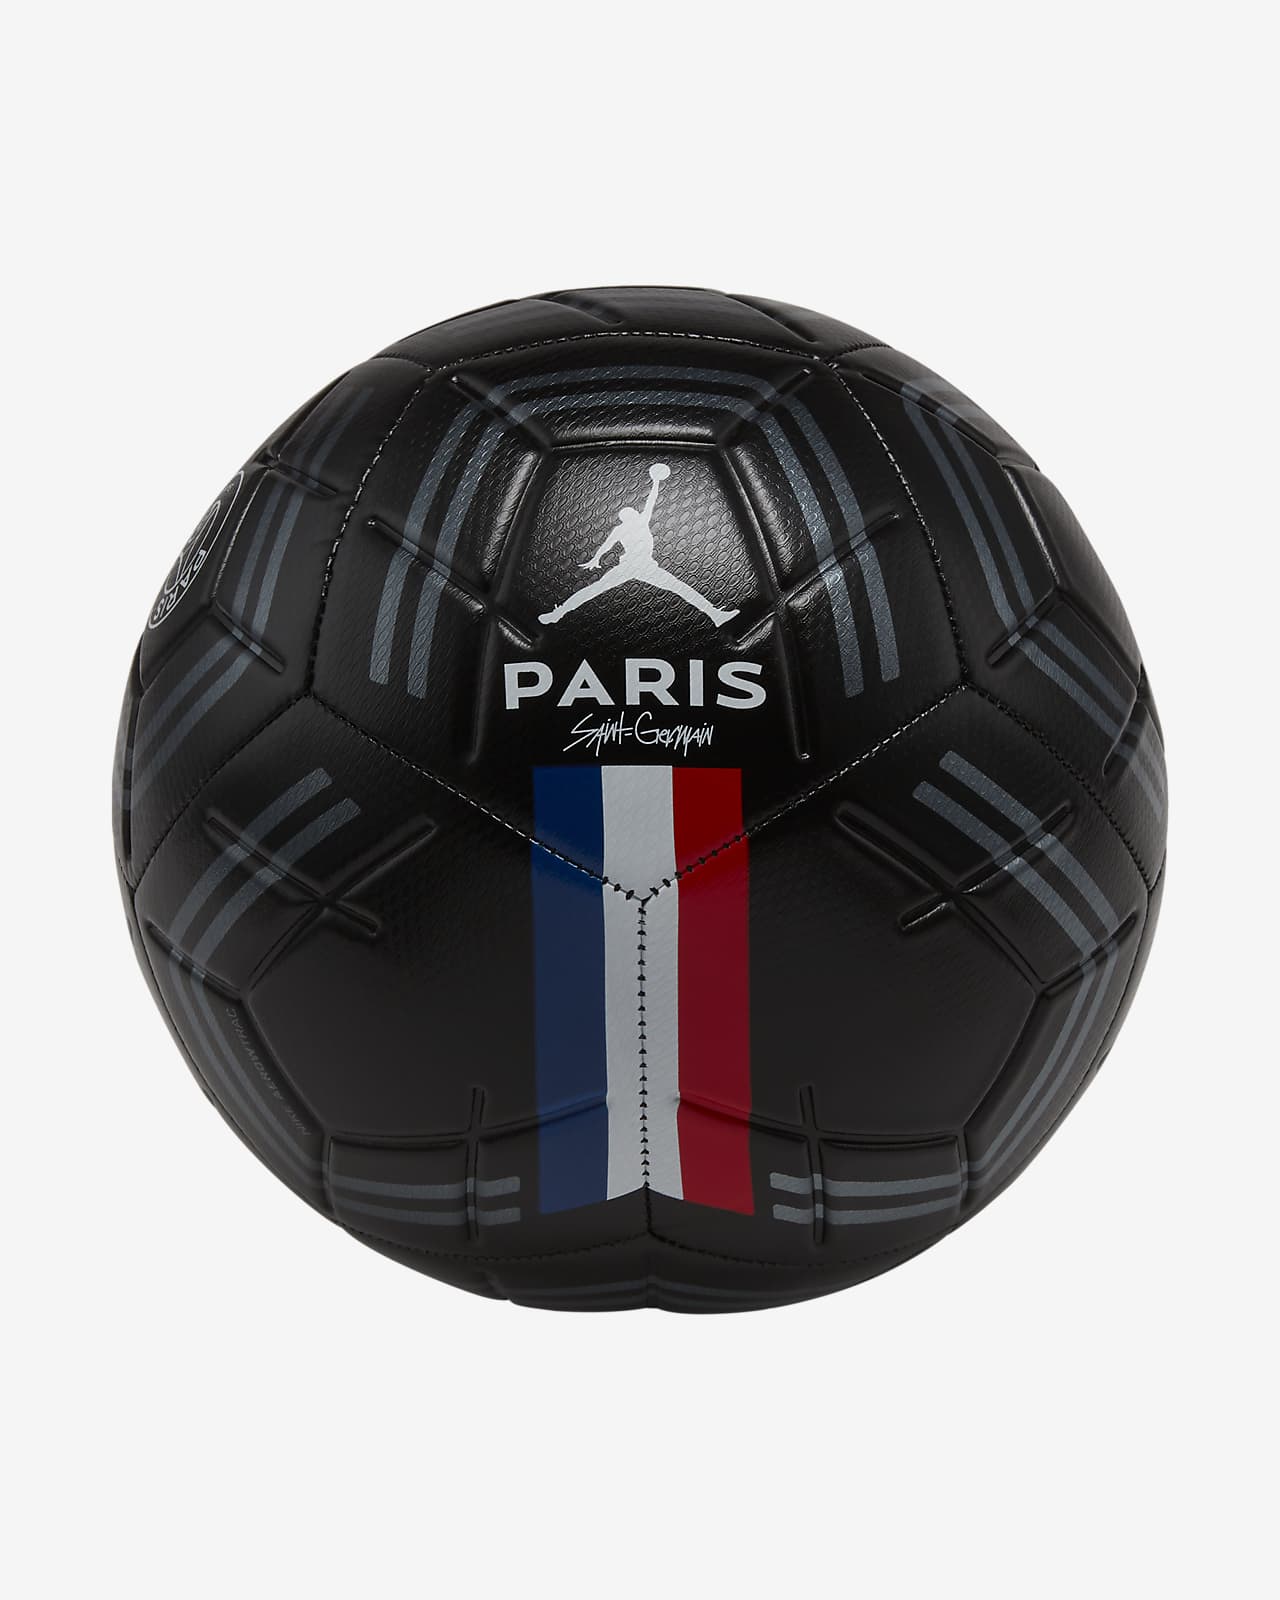 Psg  PSG Strike Football. Nike GB  We are on league of legends and